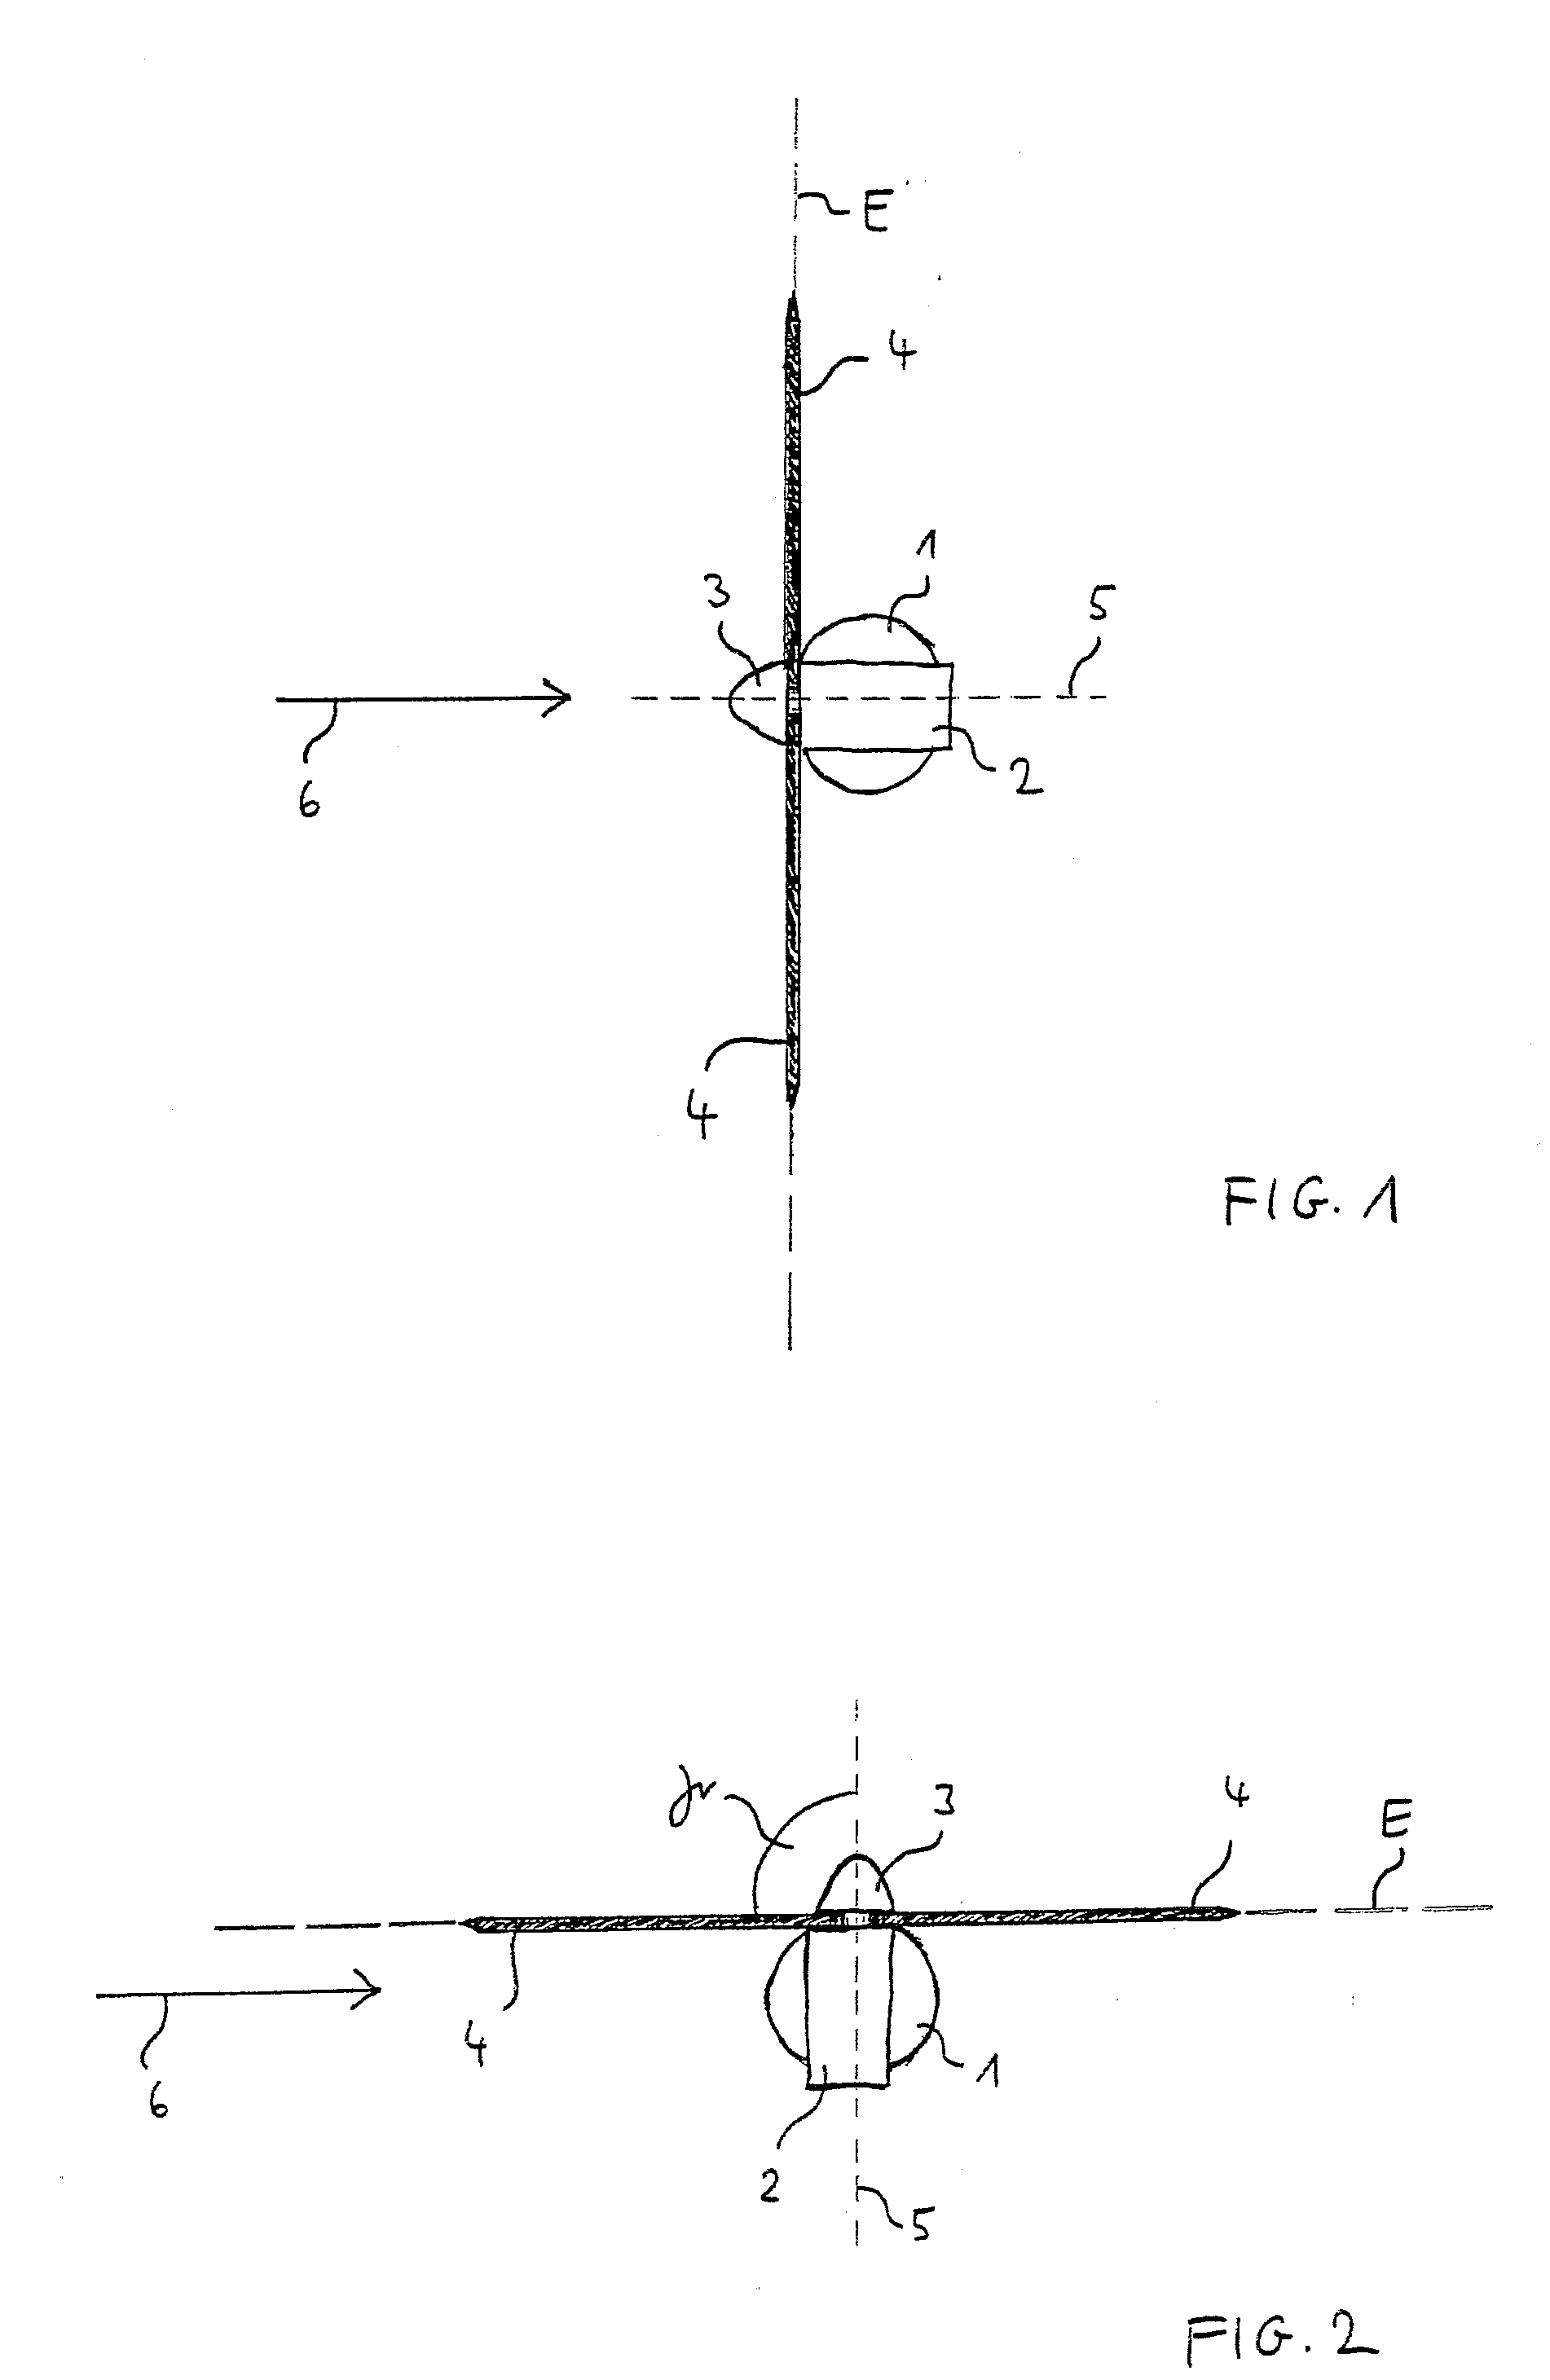 Method for controlling a wind energy plant